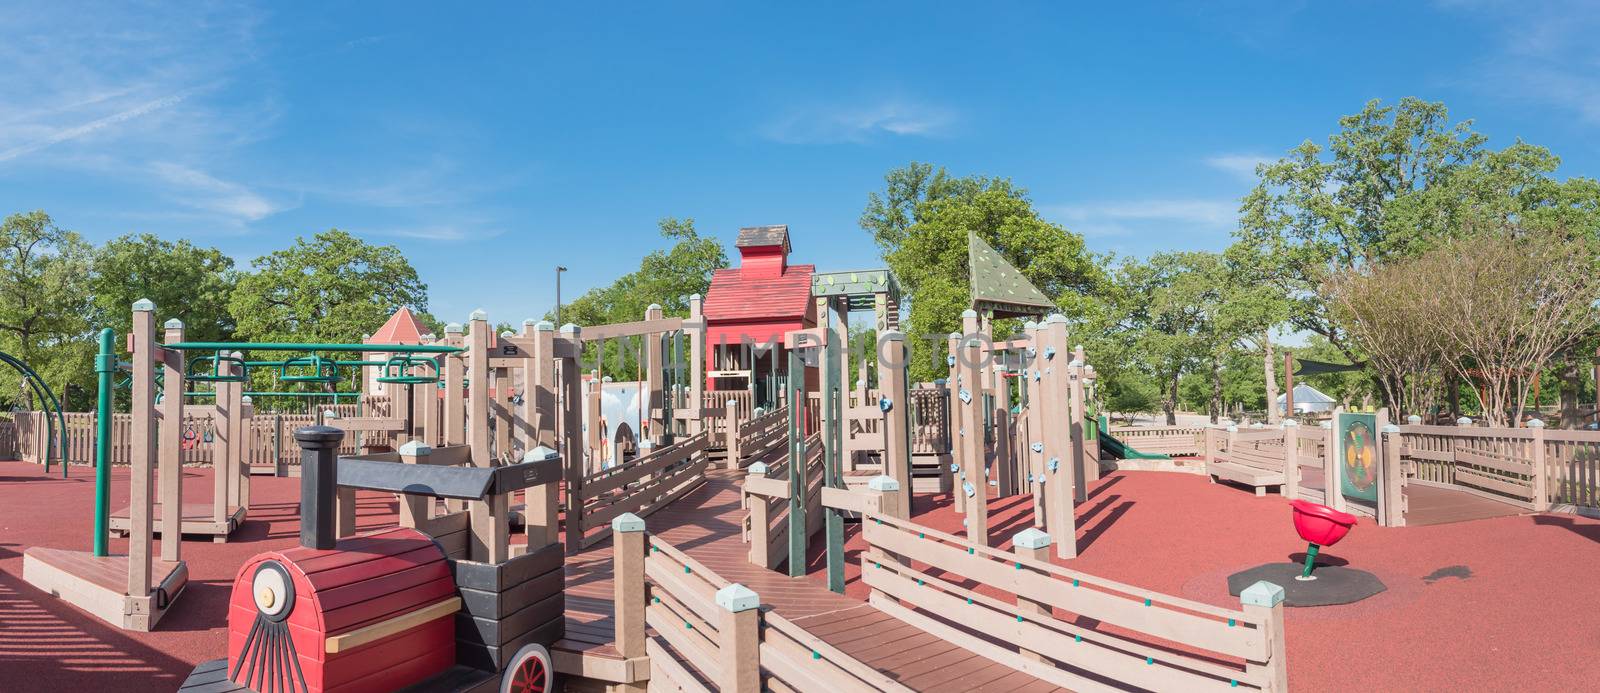 Panoramic kid wooden playground recreation area at American publ by trongnguyen